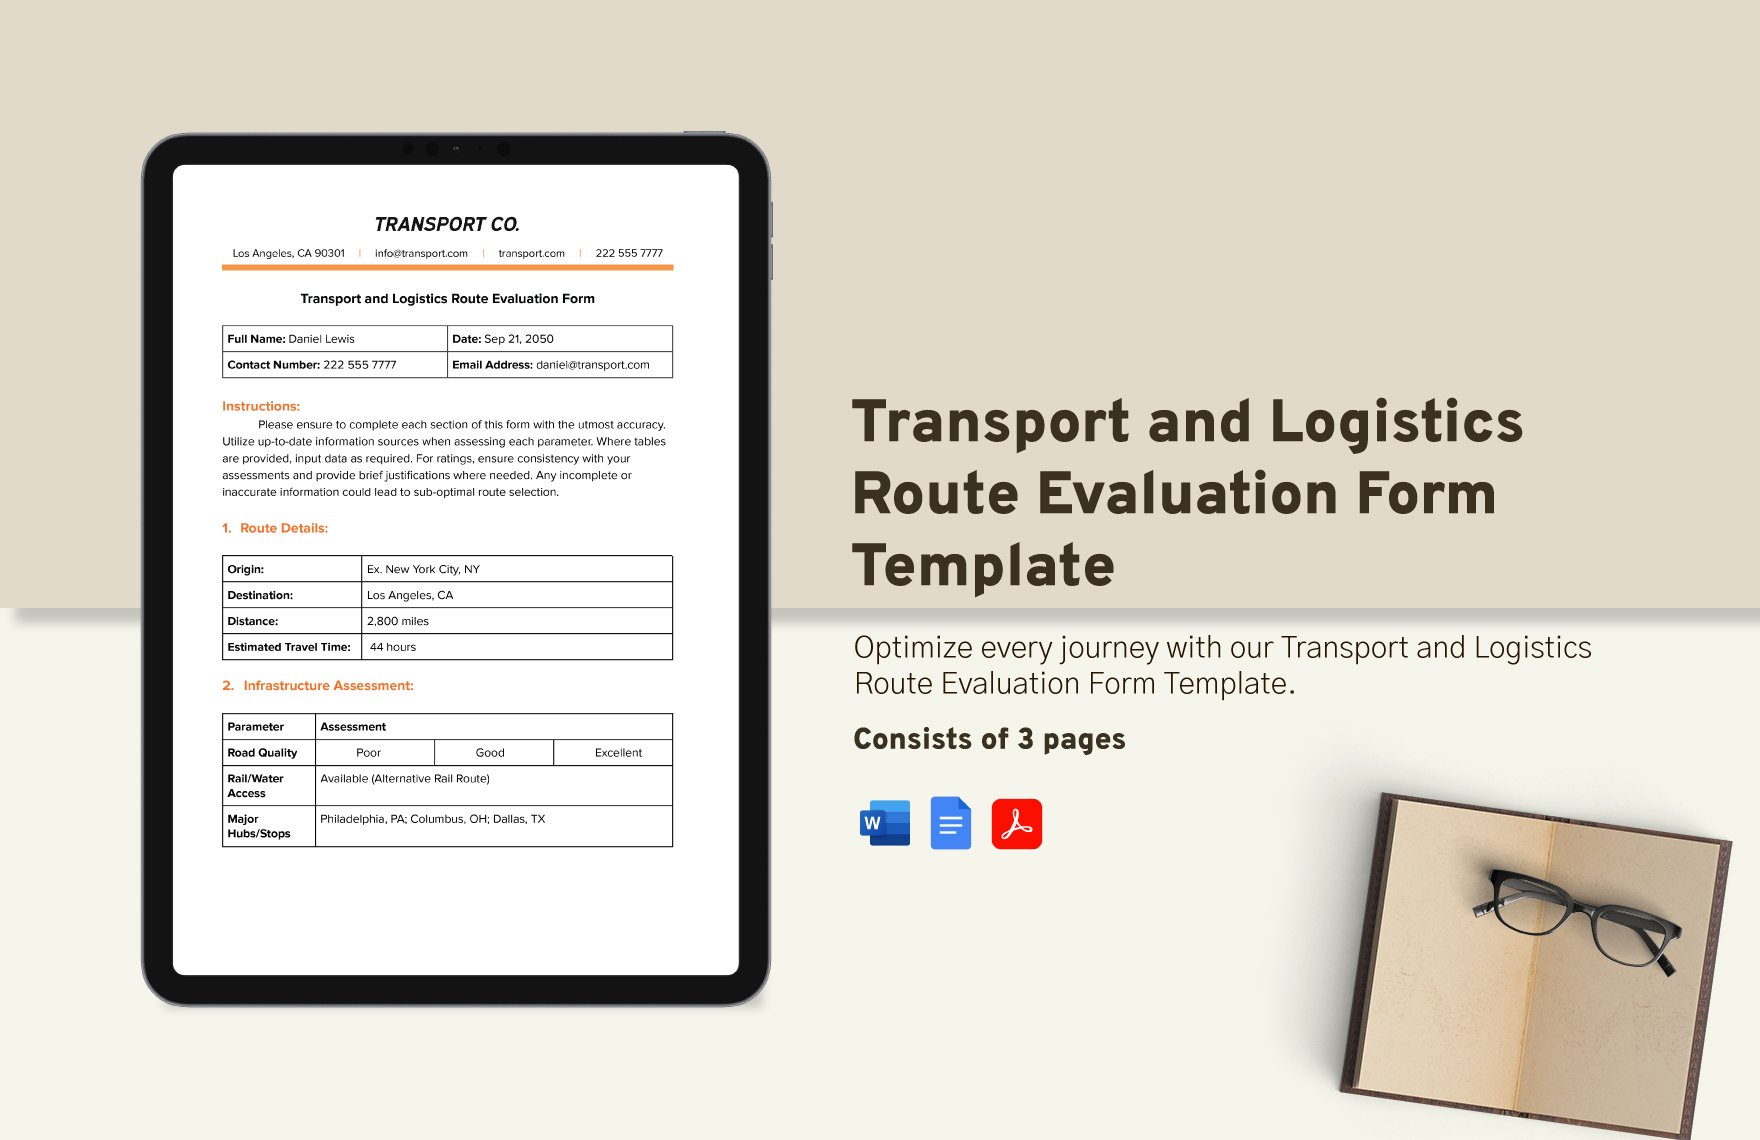 Transport and Logistics  Route Evaluation Form  Template in Word, Google Docs, PDF